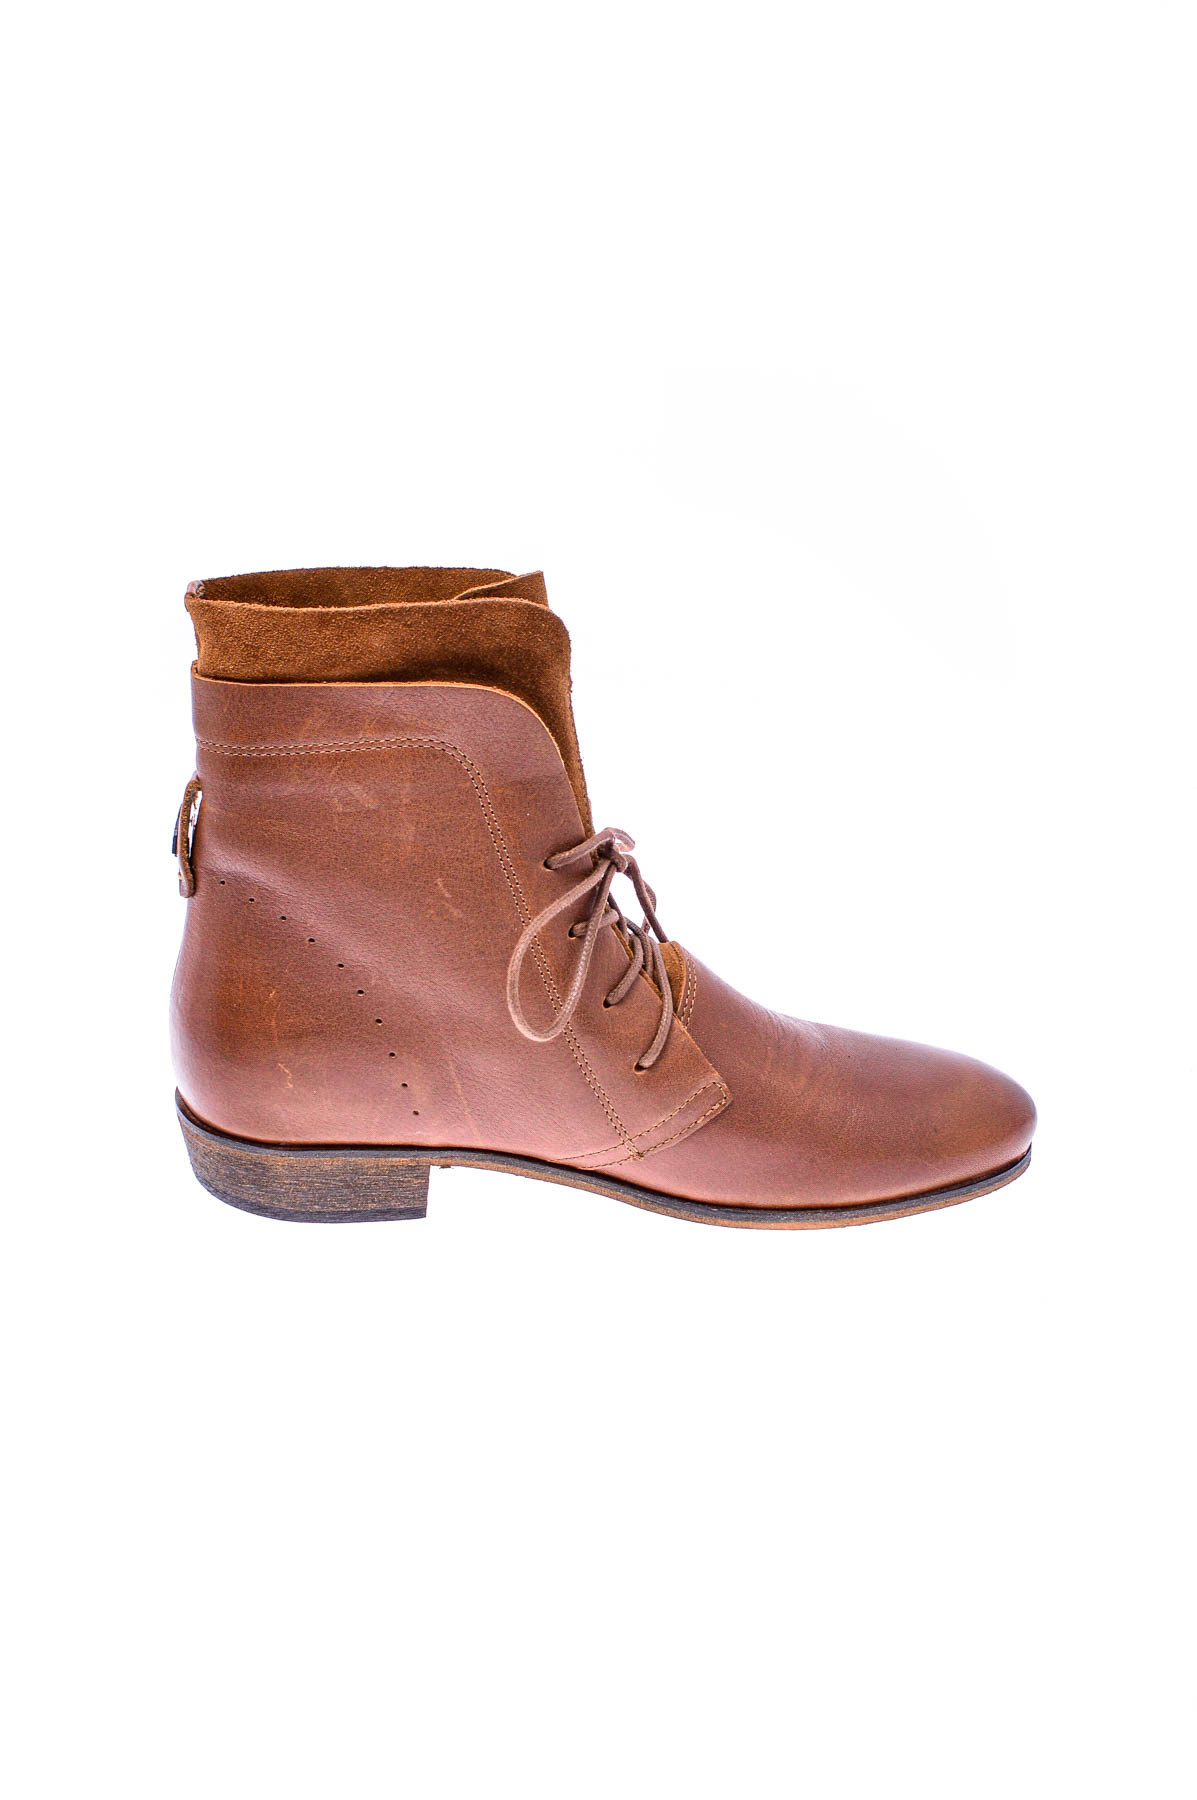 Women's boots - Haghe by HUB - 2